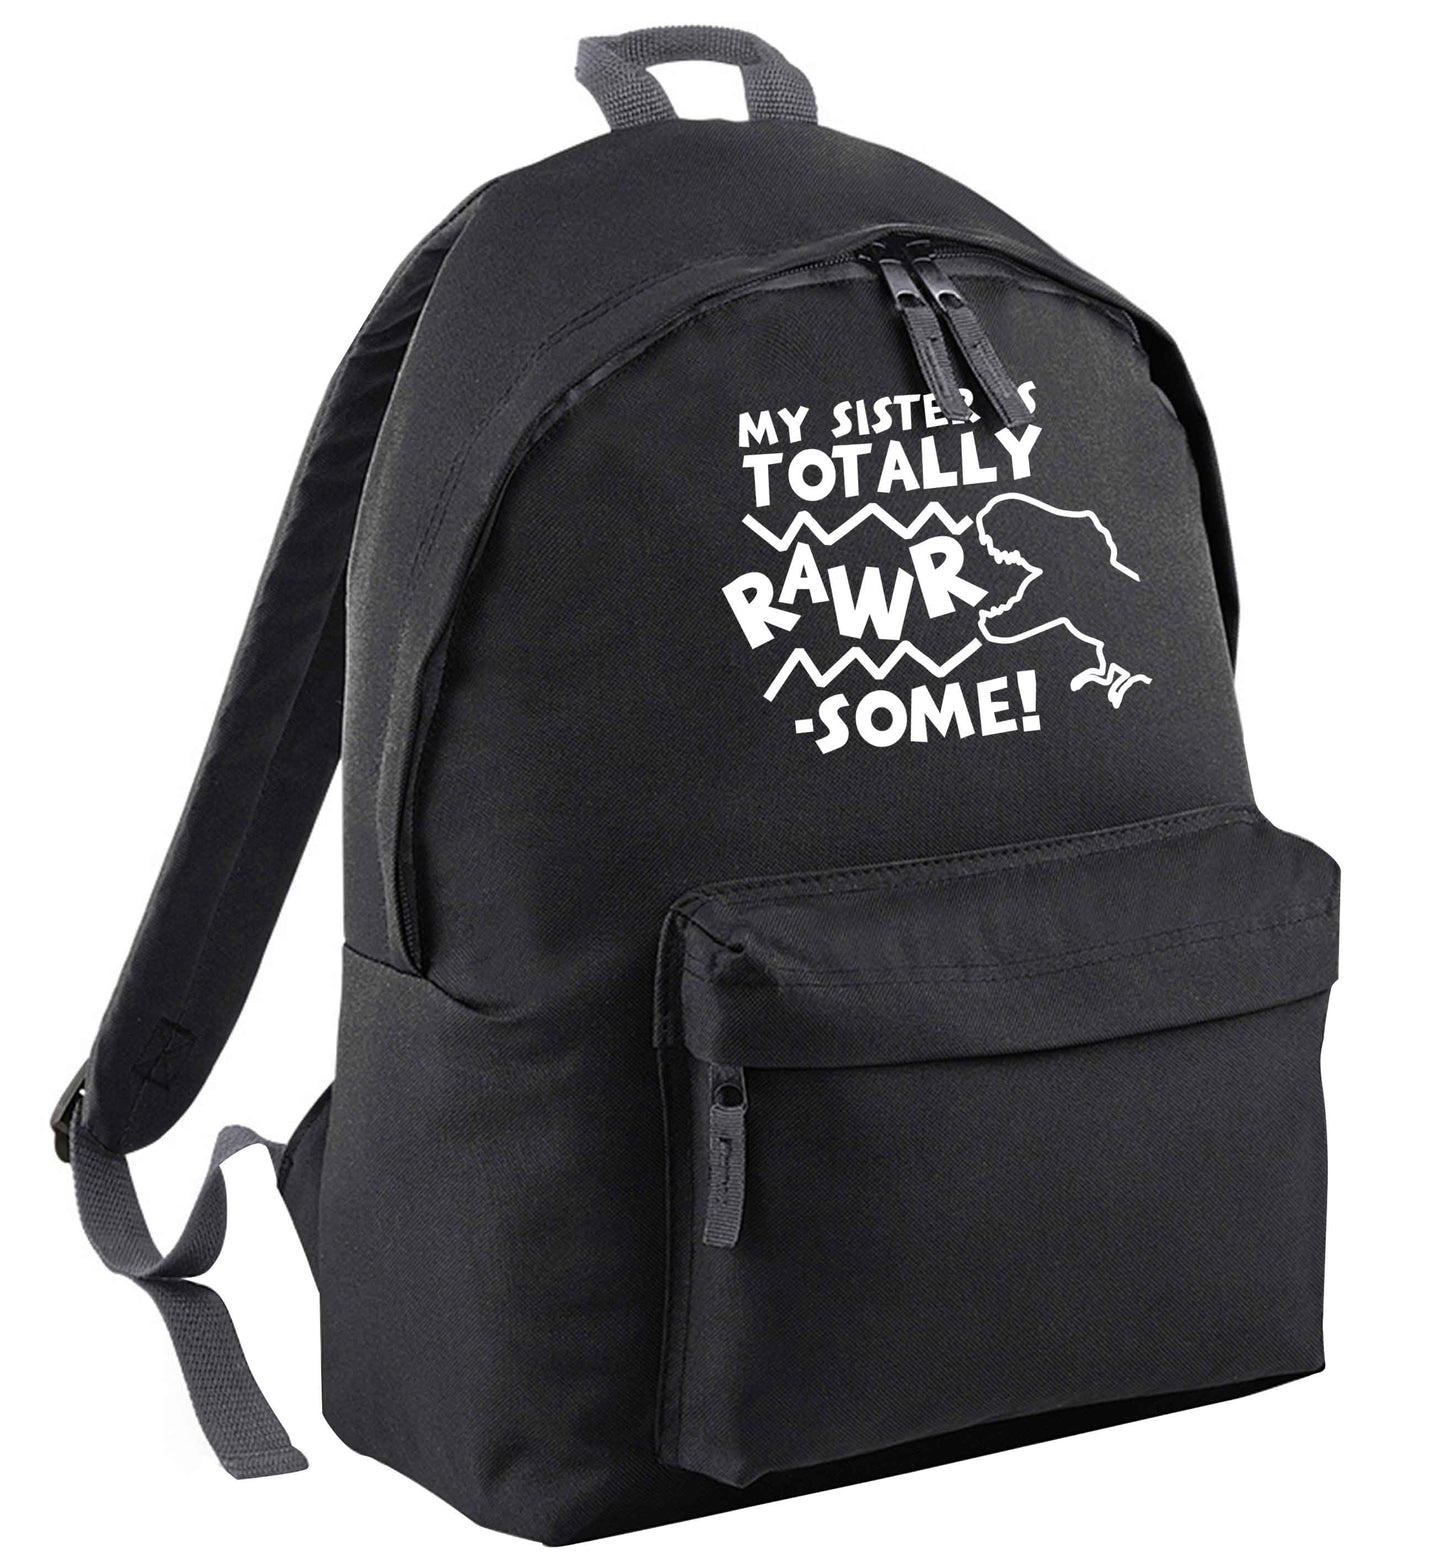 My sister is totally rawrsome | Children's backpack